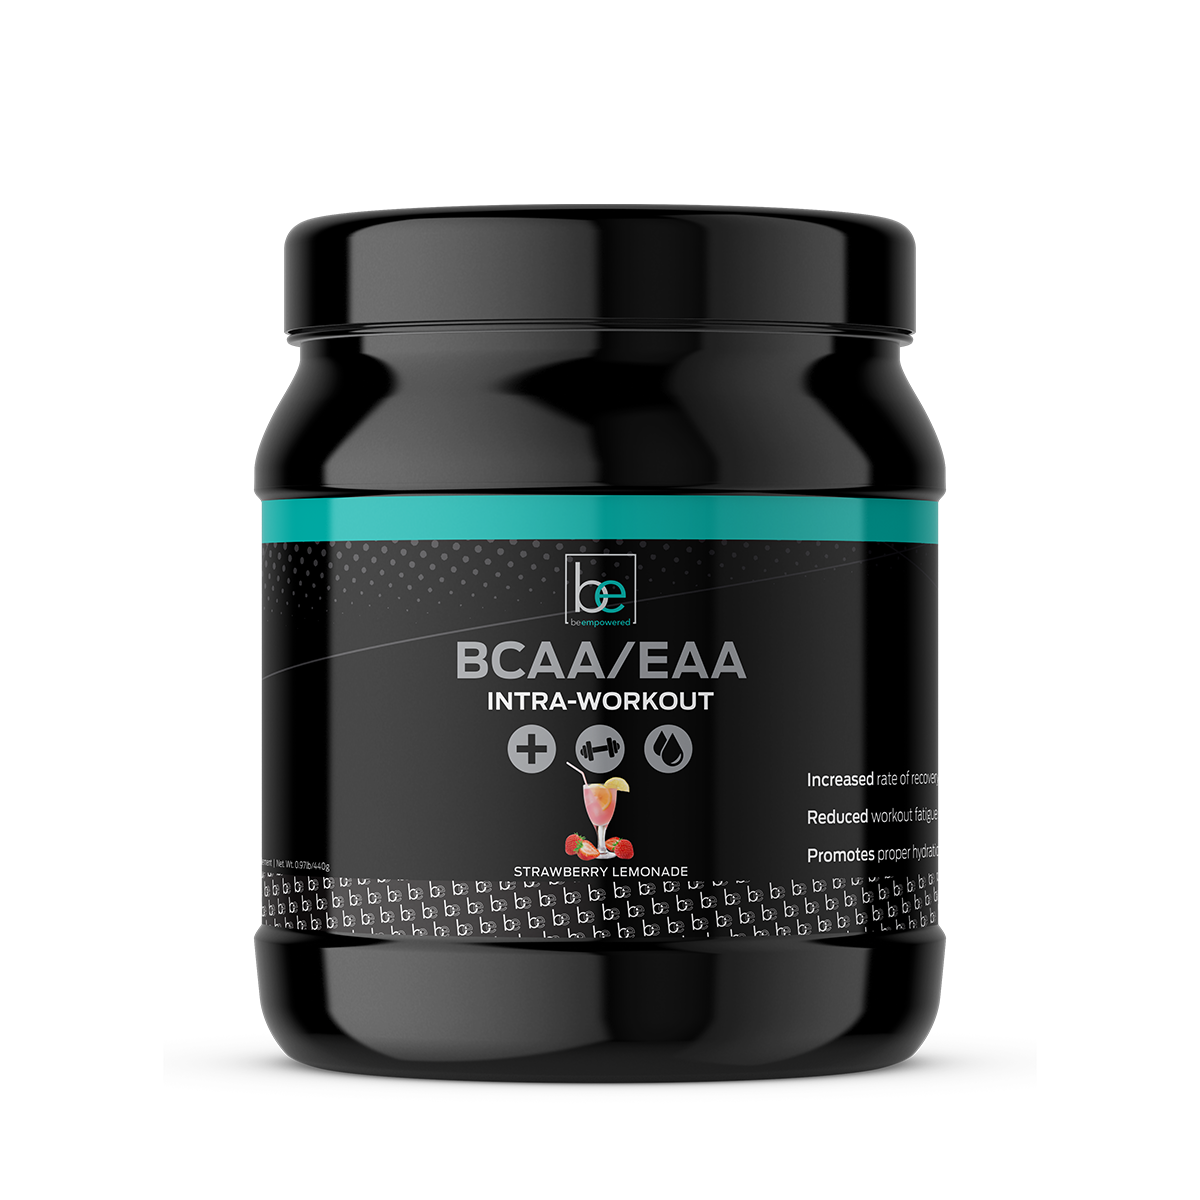 Free Gift: BCAA/EAA Intra Workout